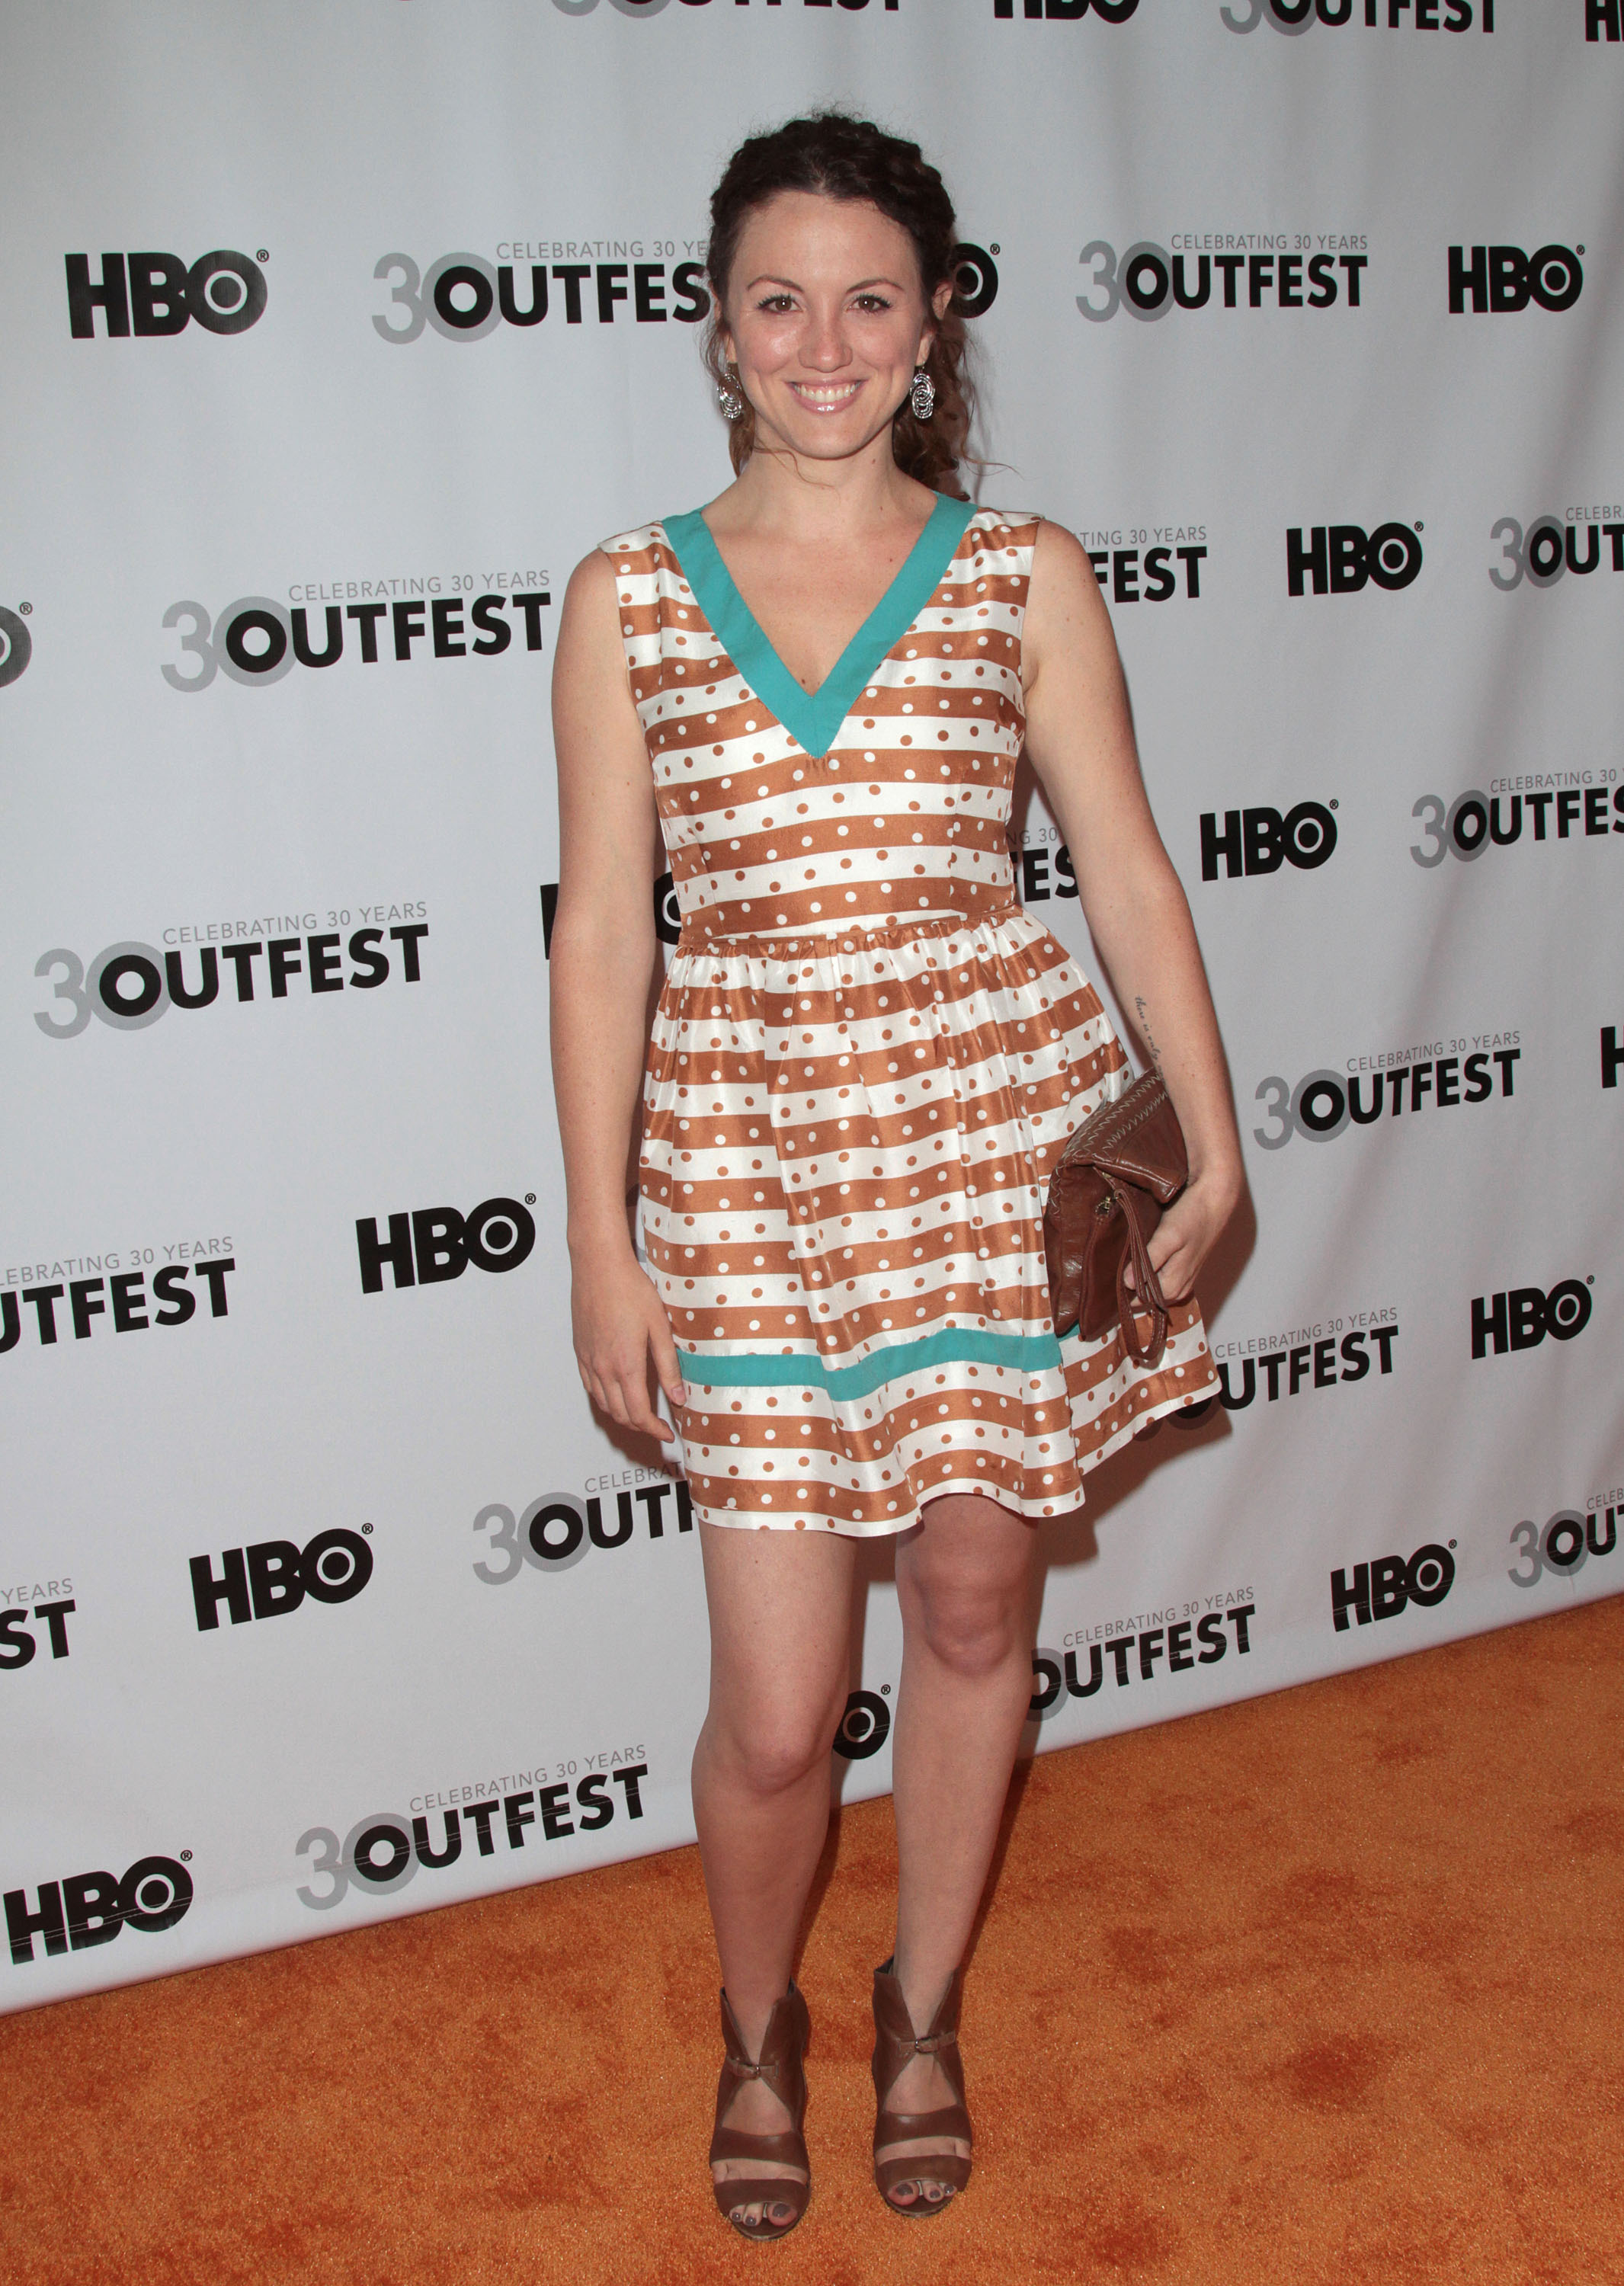 Outfest 2012 Opening Night Gala